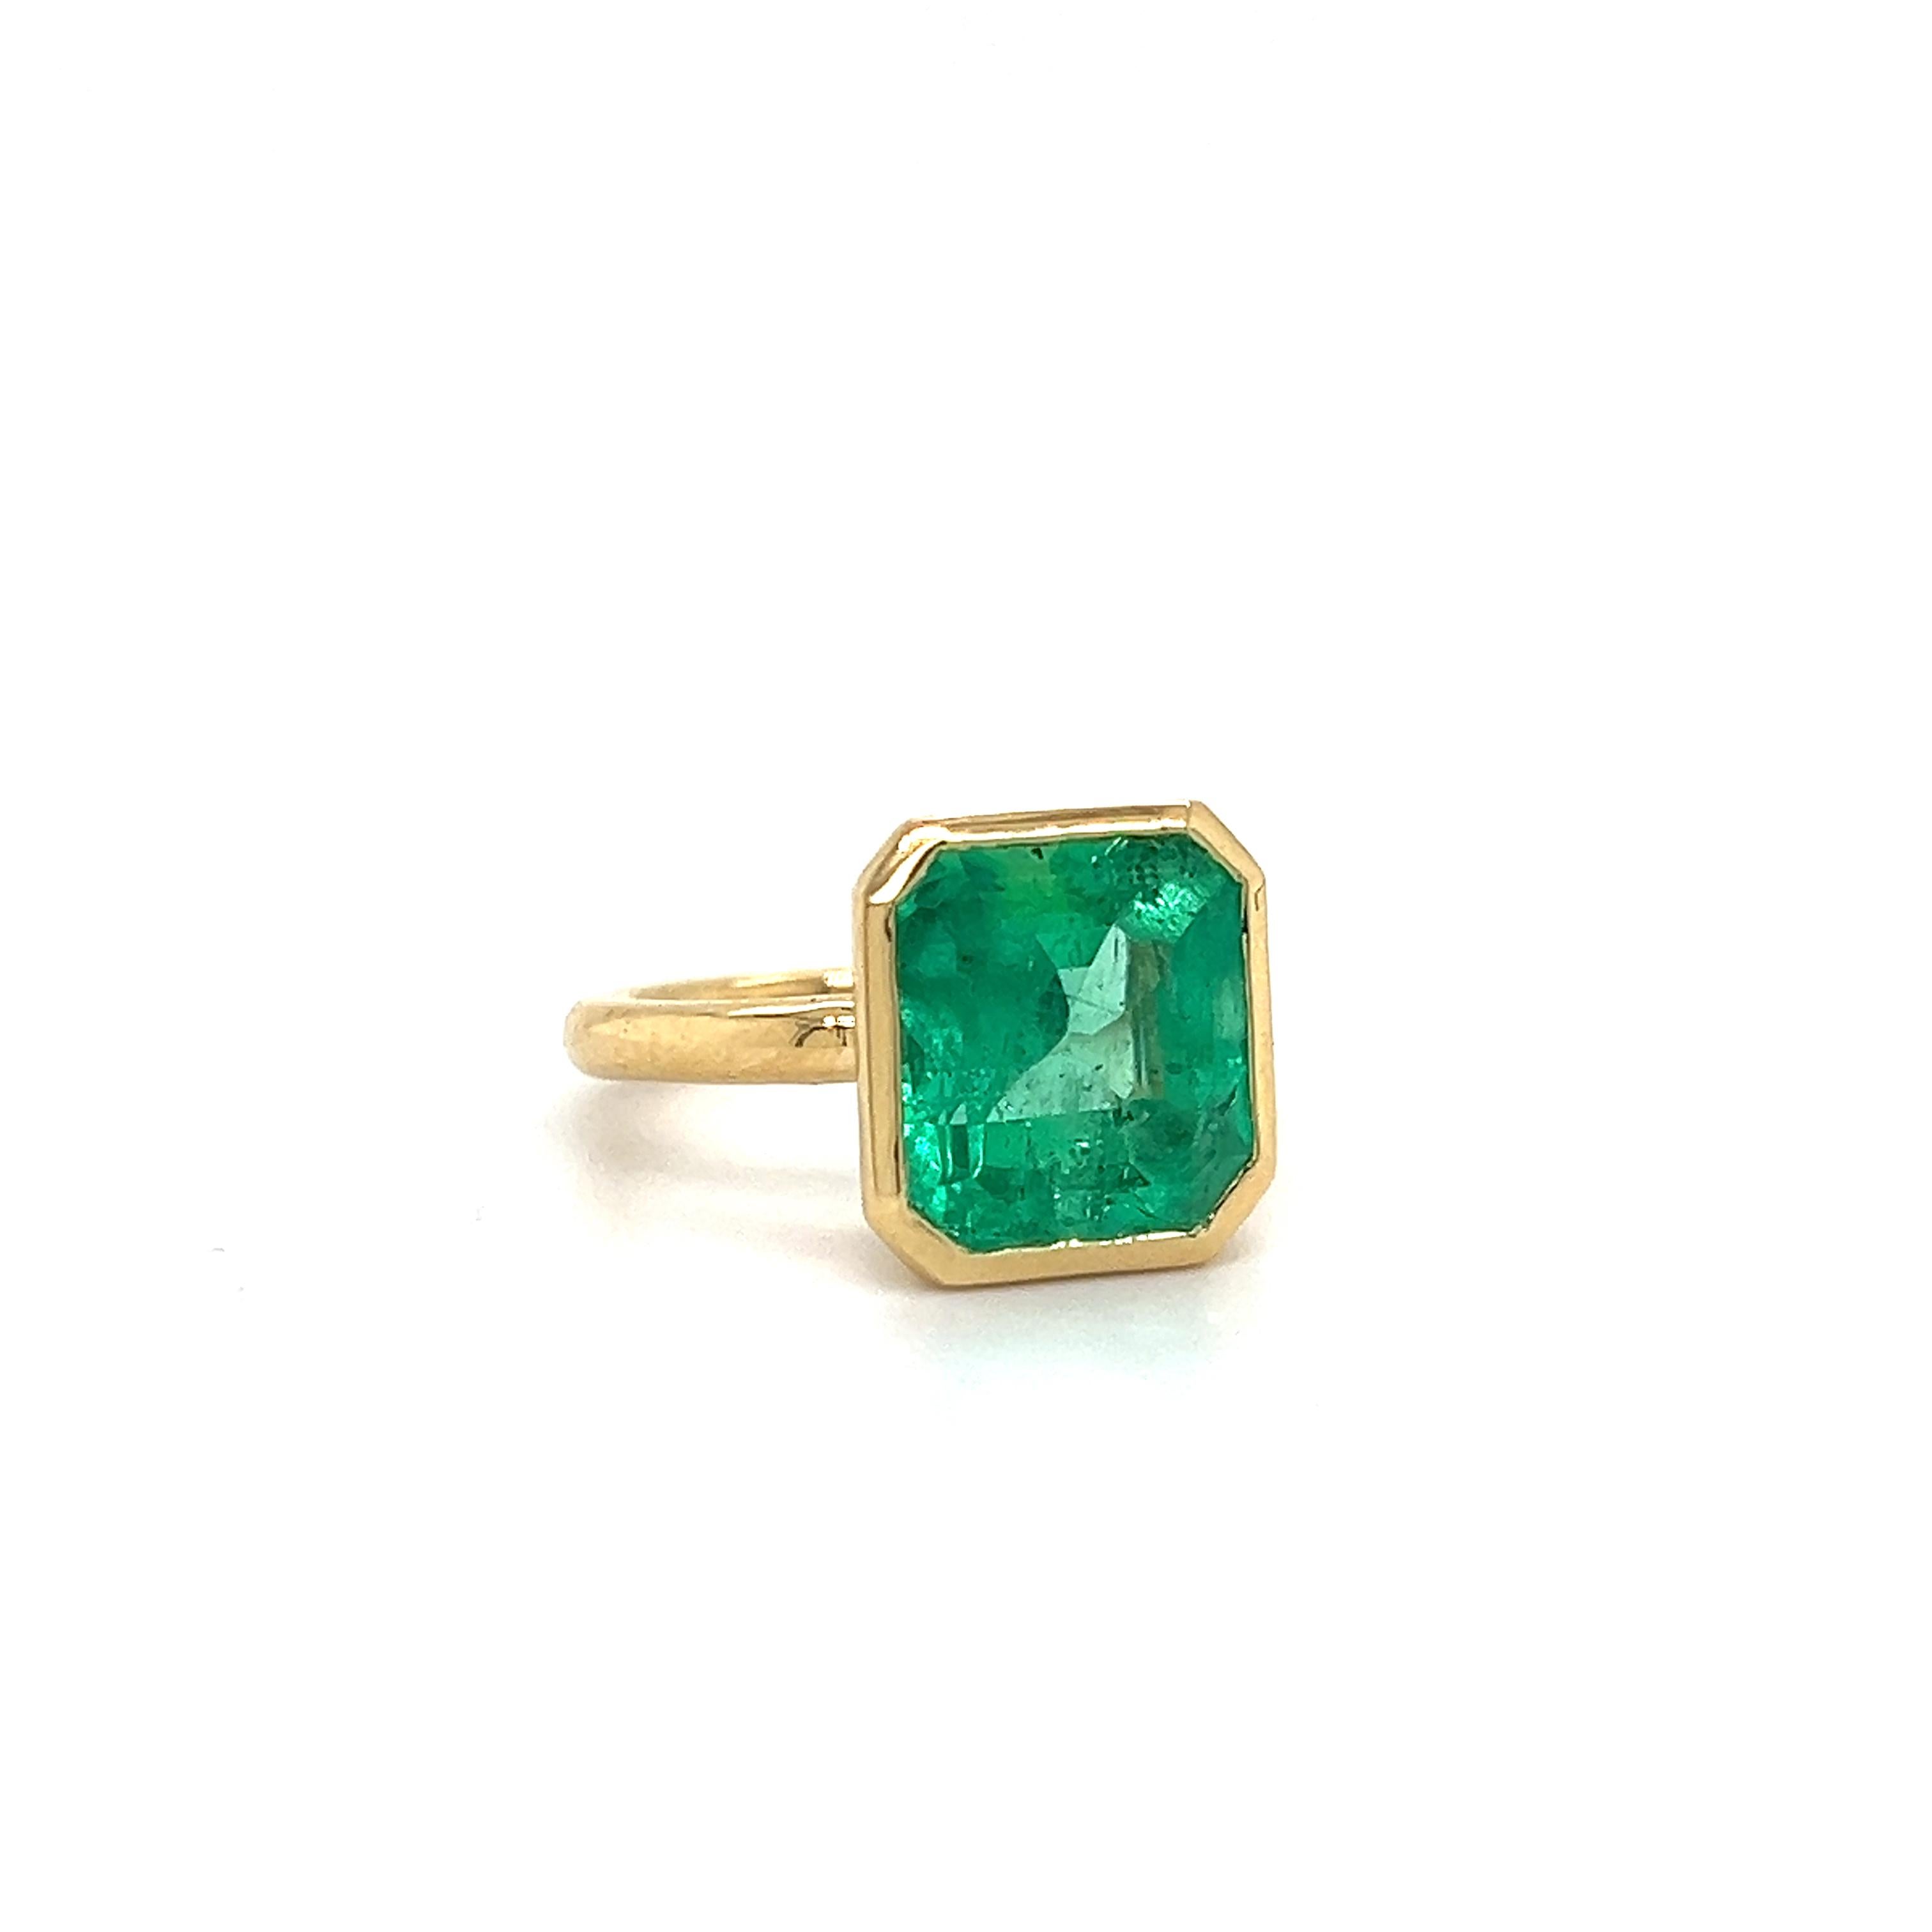 Beautiful hand made ring crafted in 18k yellow gold. The ring highlights one Colombian emerald gemstone that displays an electric green color. 
The emerald gemstone weighs 6.10 carat and is bezel set in the 18k gold ring. Sharp edges make this